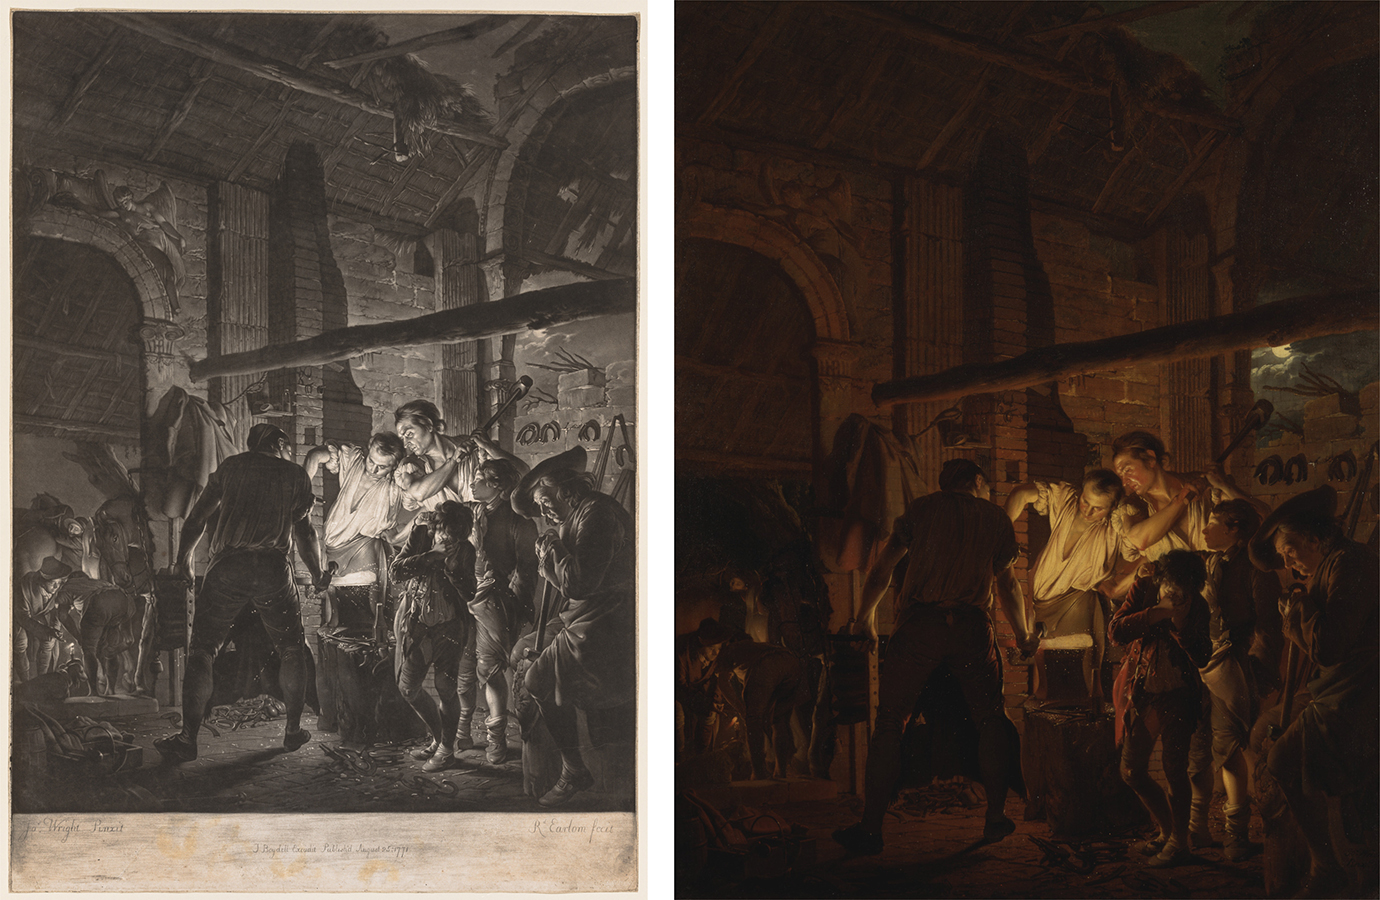 Left: Richard Earlom after Joseph Wright of Derby, The Blacksmith Shop, 1771, mezzotint ii/ii (Cleveland Museum of Art, Cleveland); Right: Joseph Wright of Derby, The Blacksmith Shop, 1771, oil on canvas, 128.3 x 104.1 cm (Yale Center for British Art, New Haven)